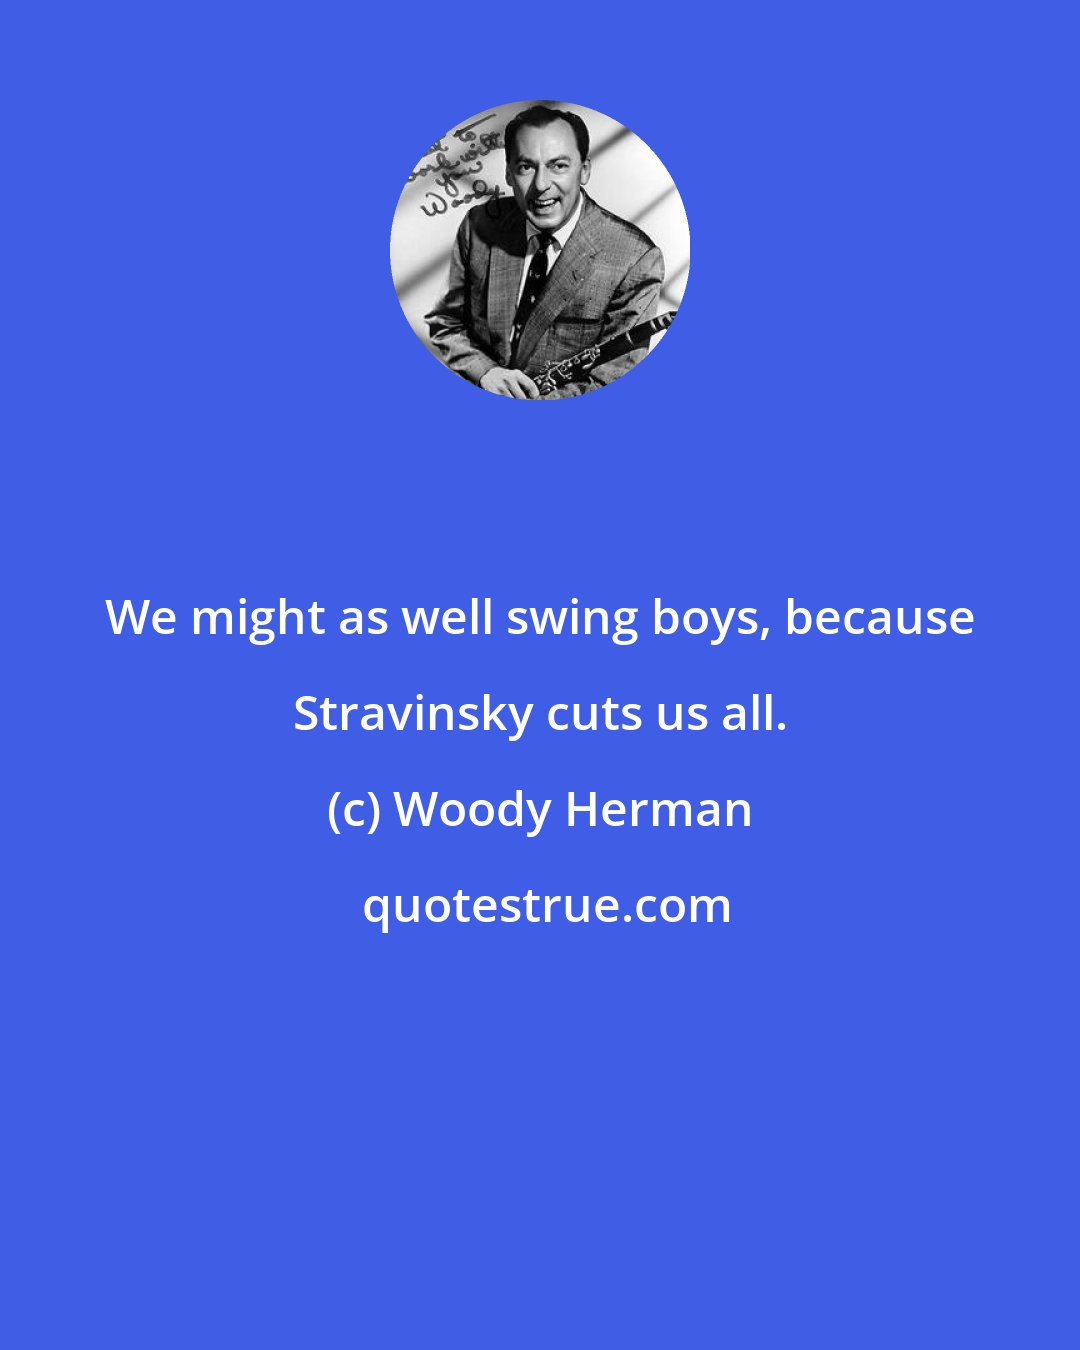 Woody Herman: We might as well swing boys, because Stravinsky cuts us all.